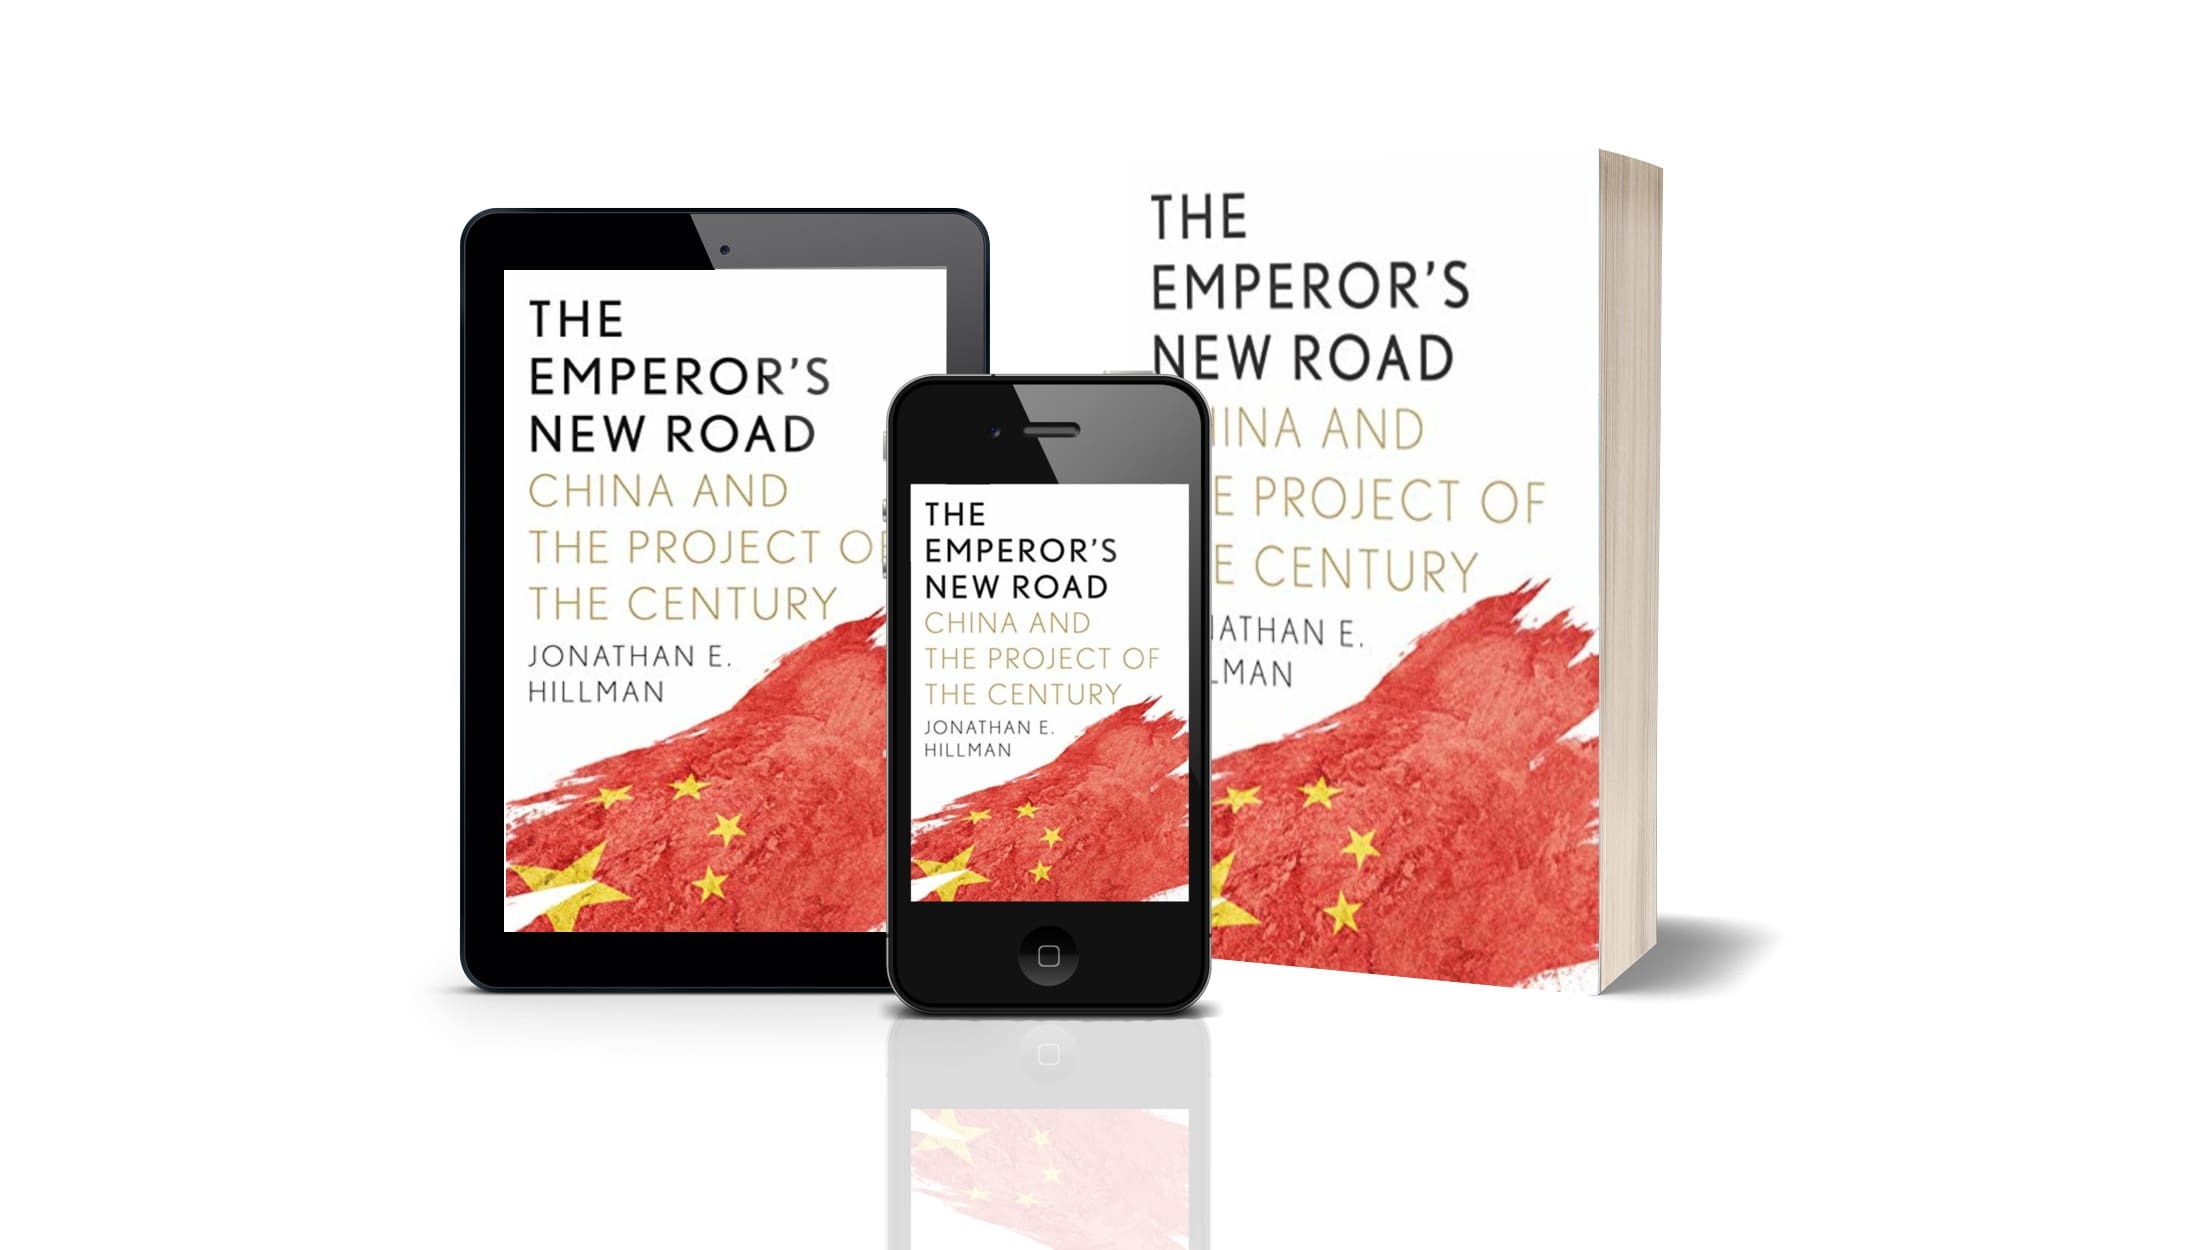 The Emperor’s New Road: China and the Project of the Century